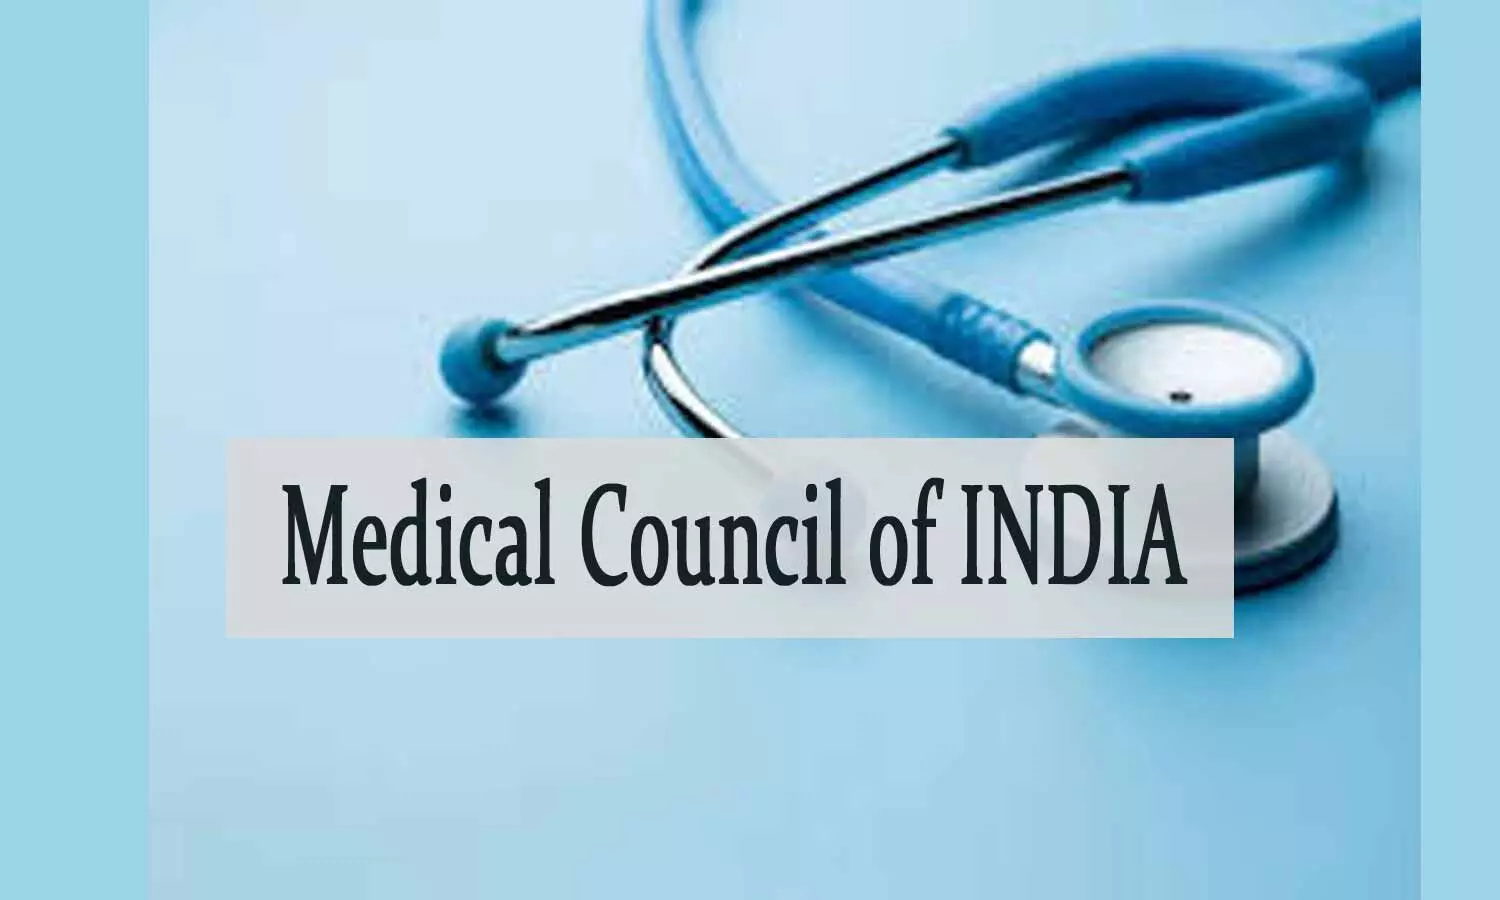 Online teaching in MBBS or equivalent not allowed: MCI